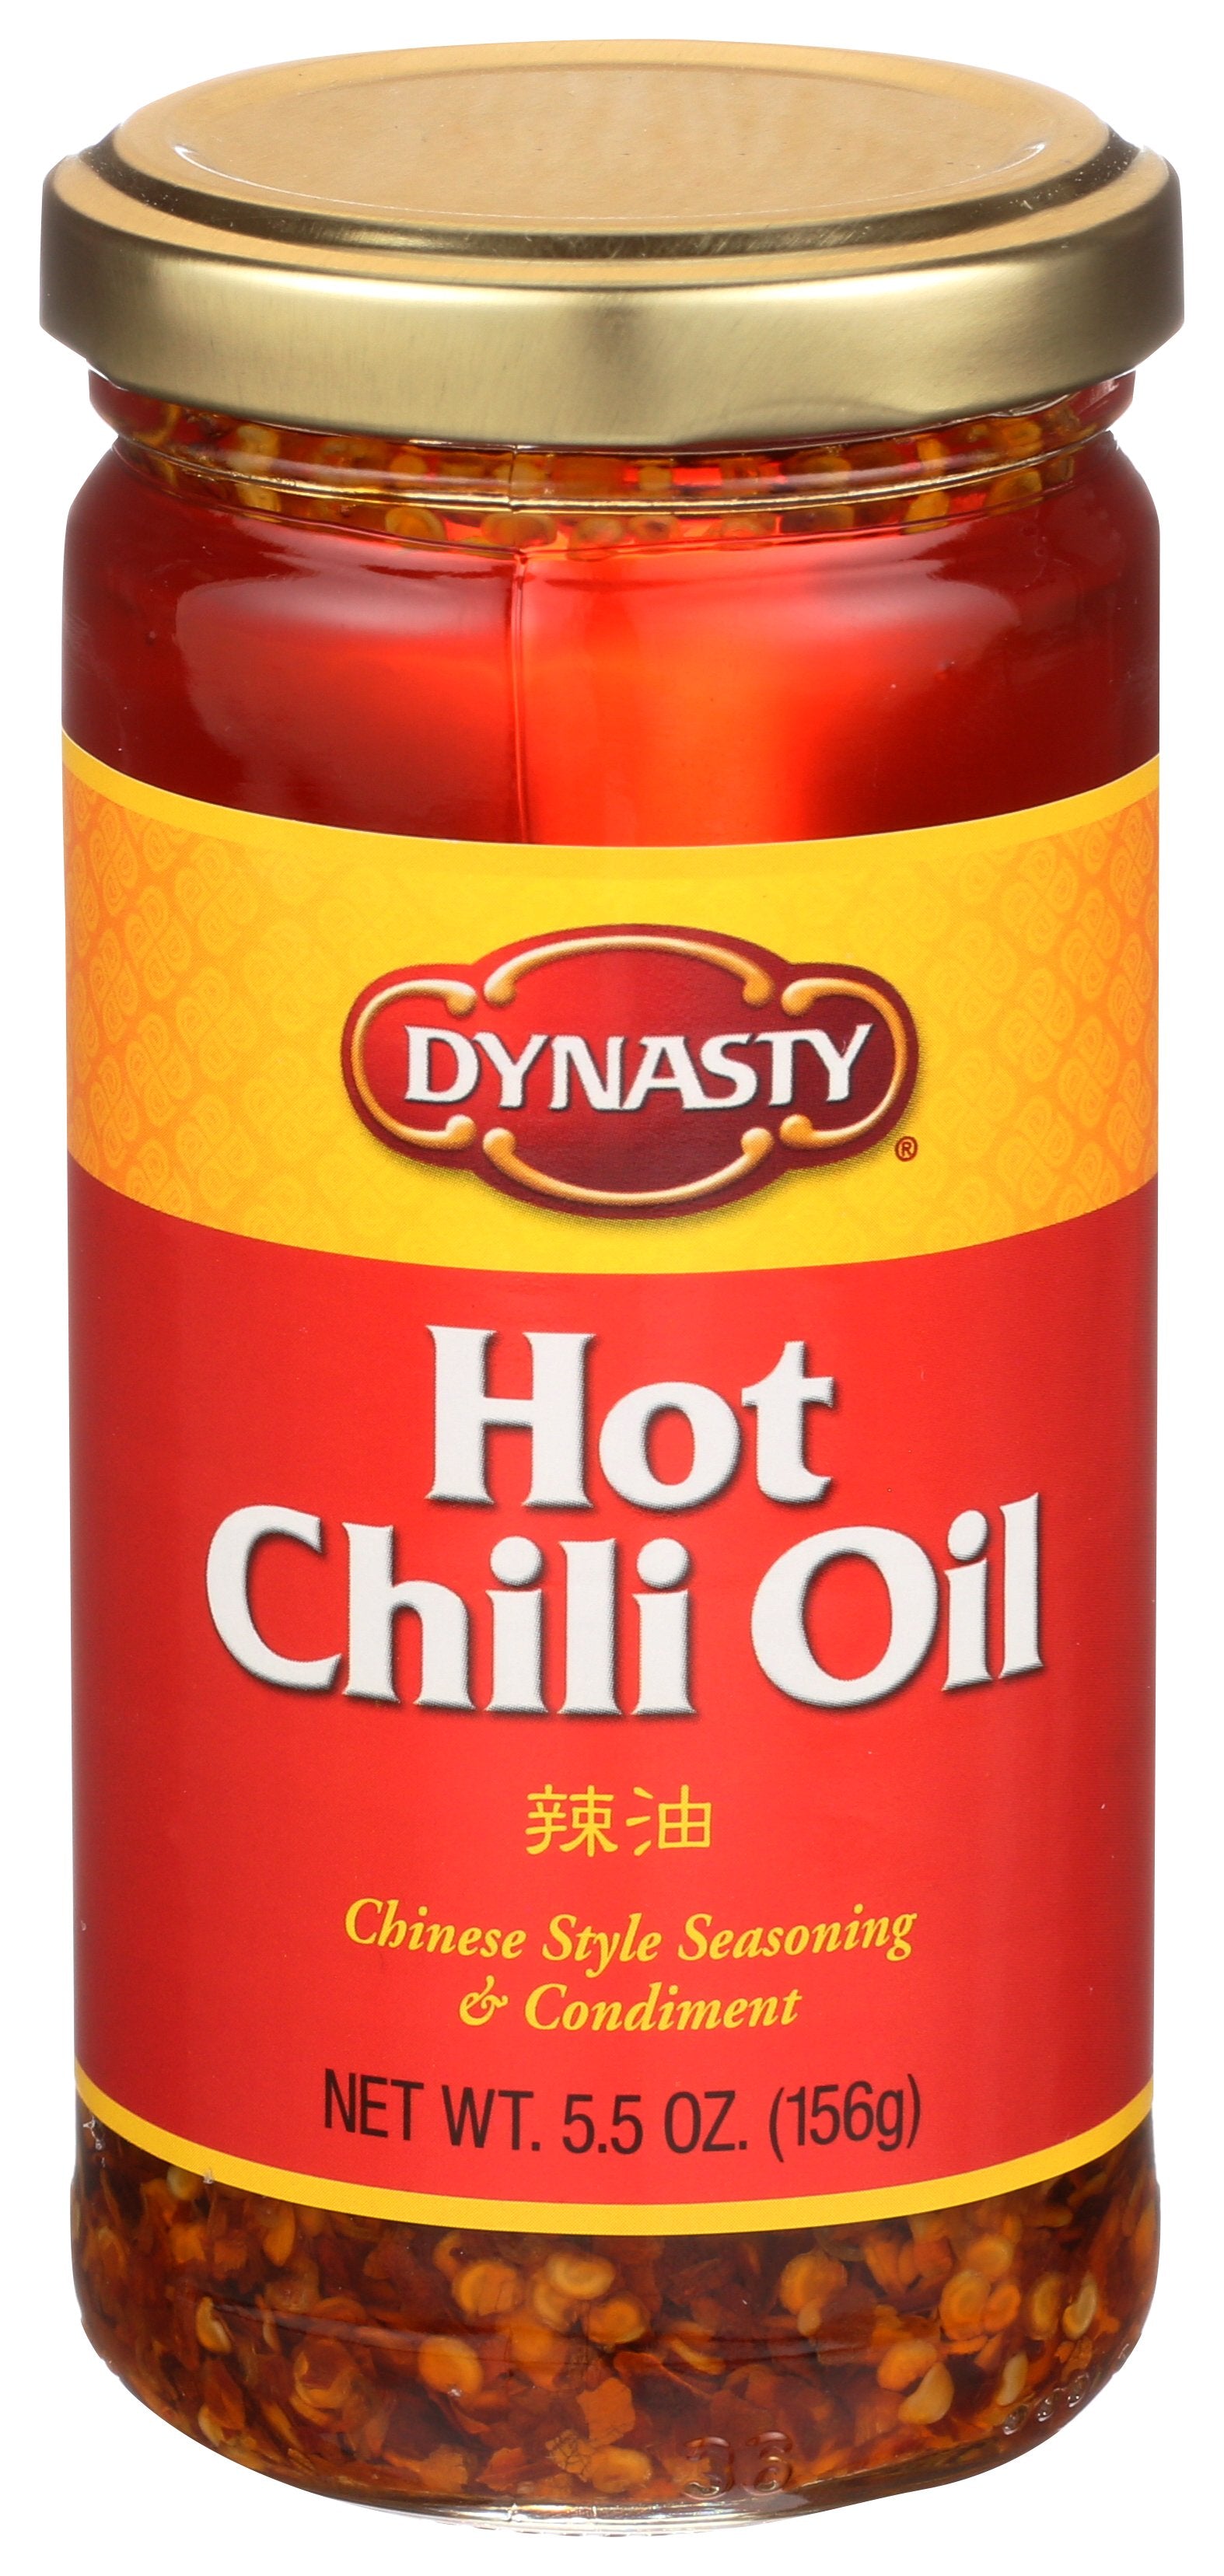 DYNASTY OIL CHILI HOT - Case of 6